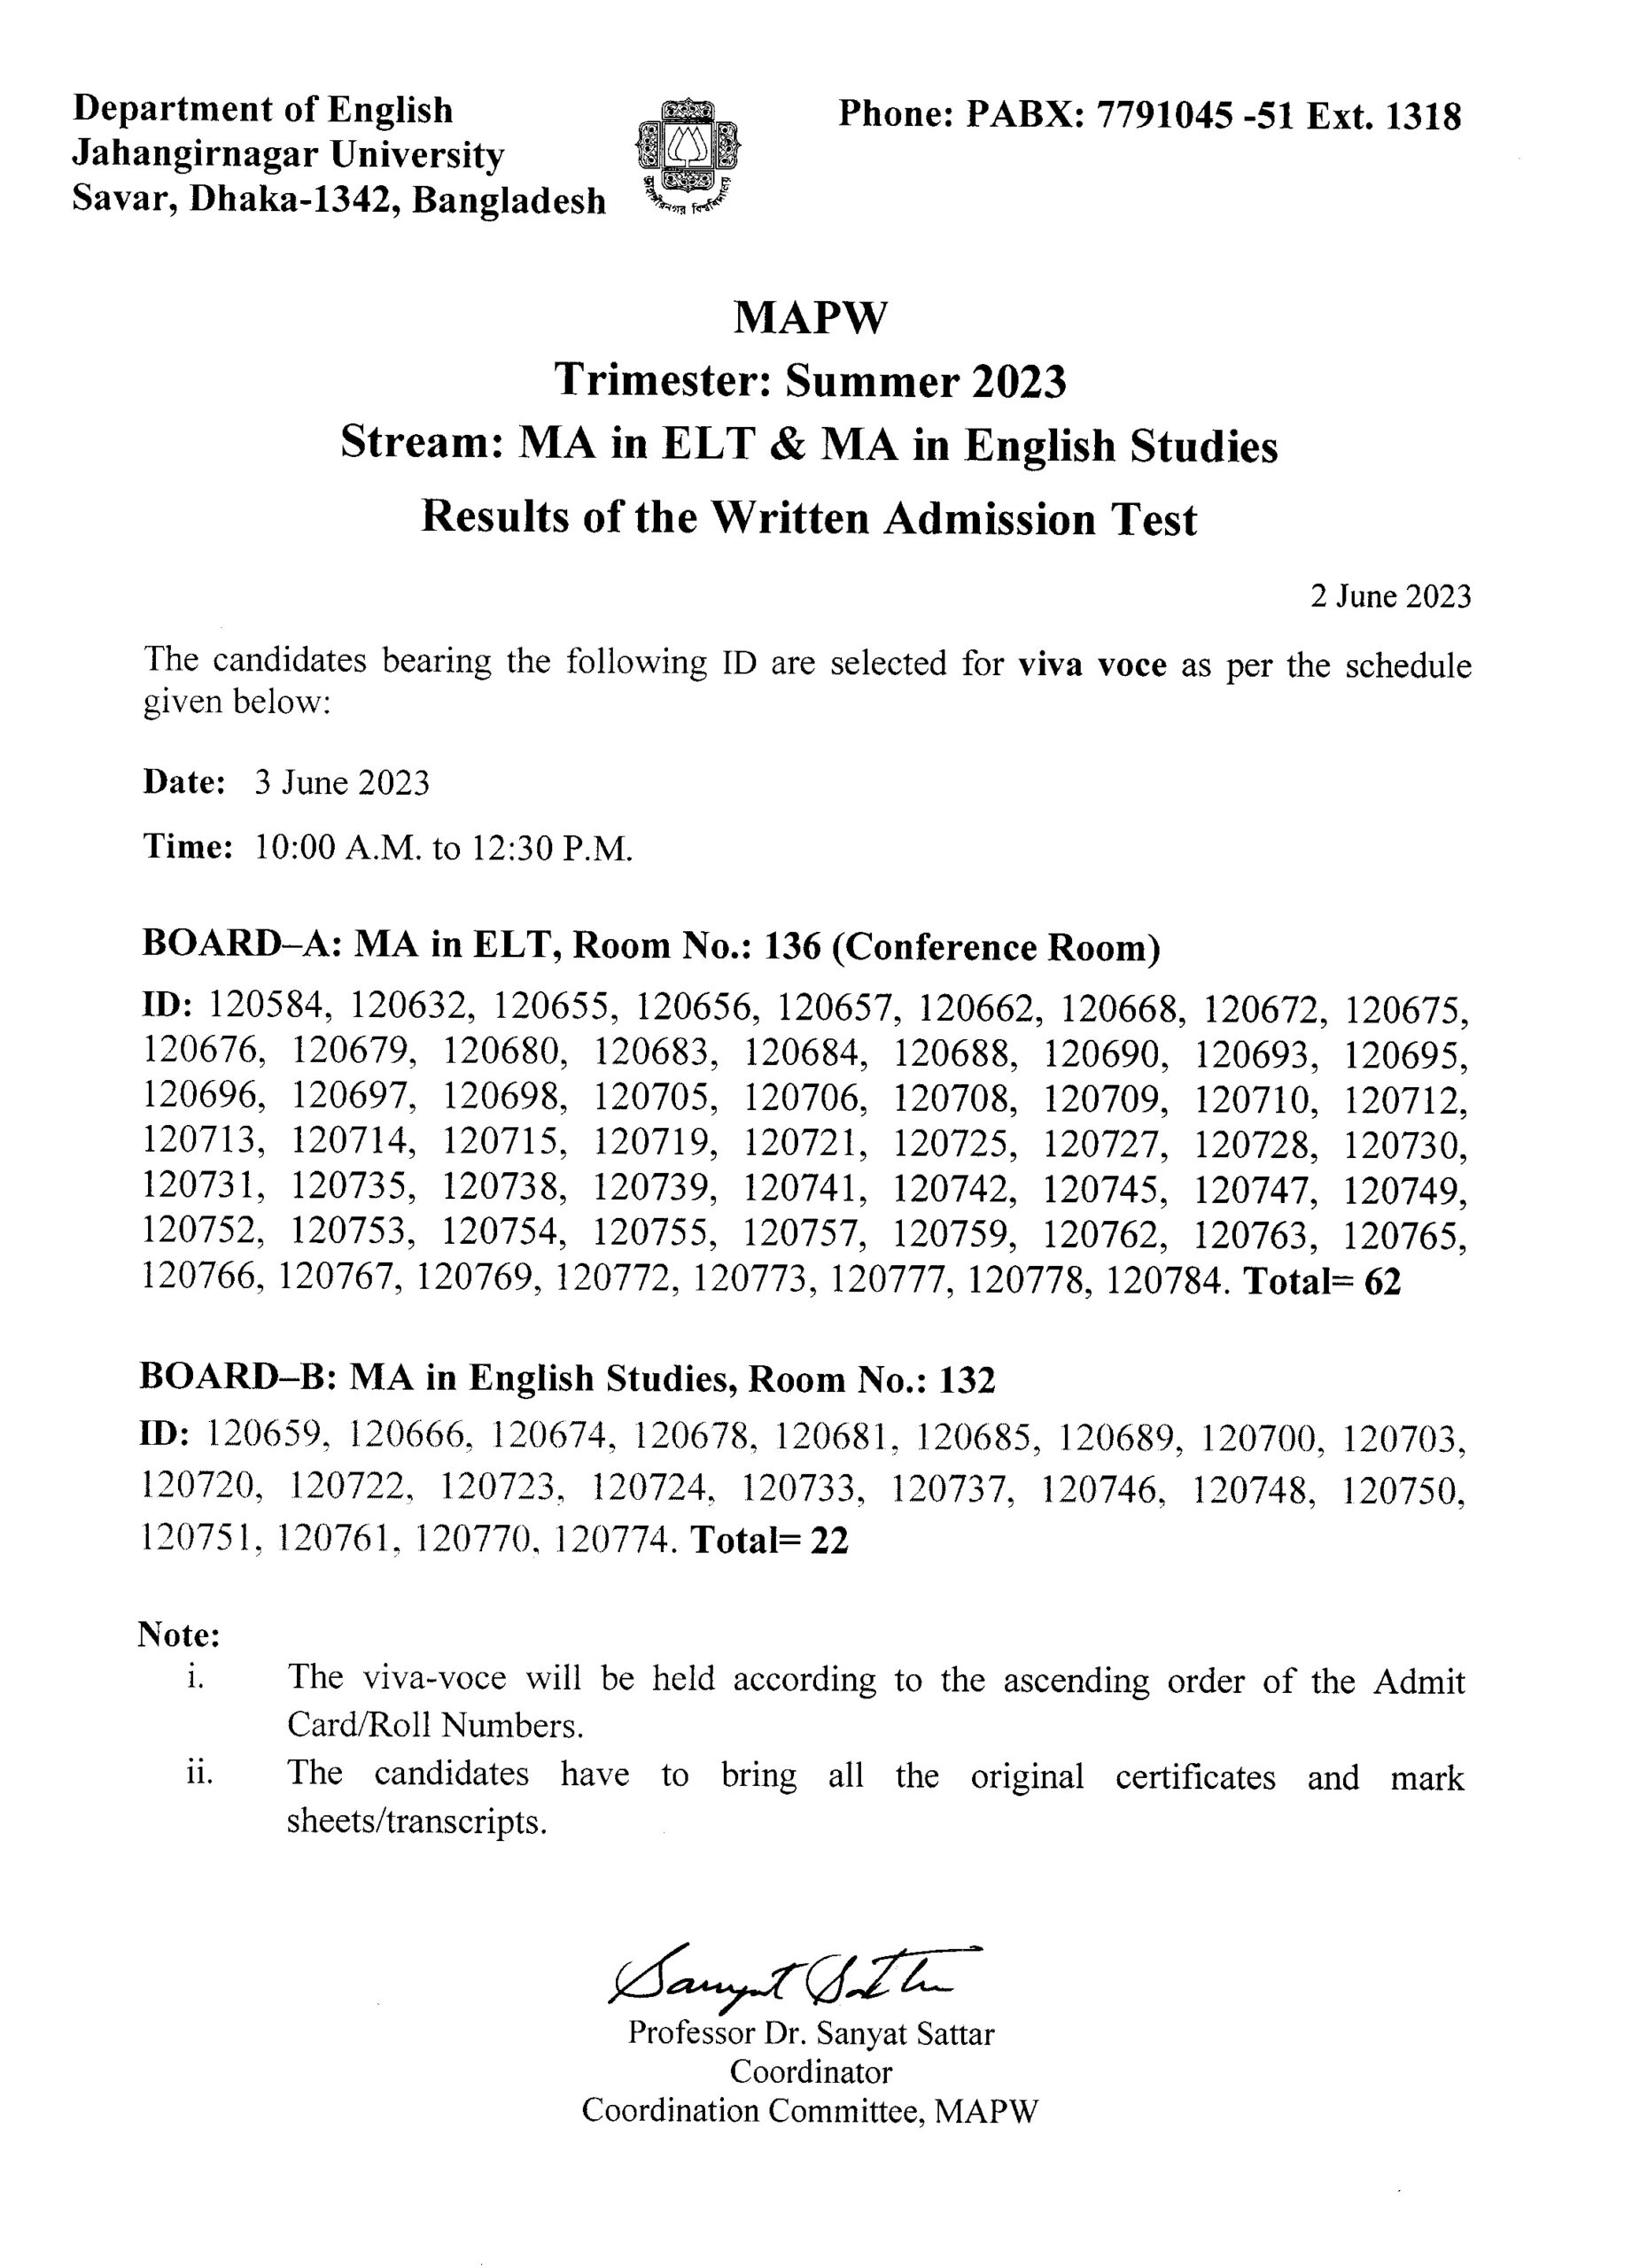 MAPW Admission Test Written Exam Results SUMMER 2023 Scaled 